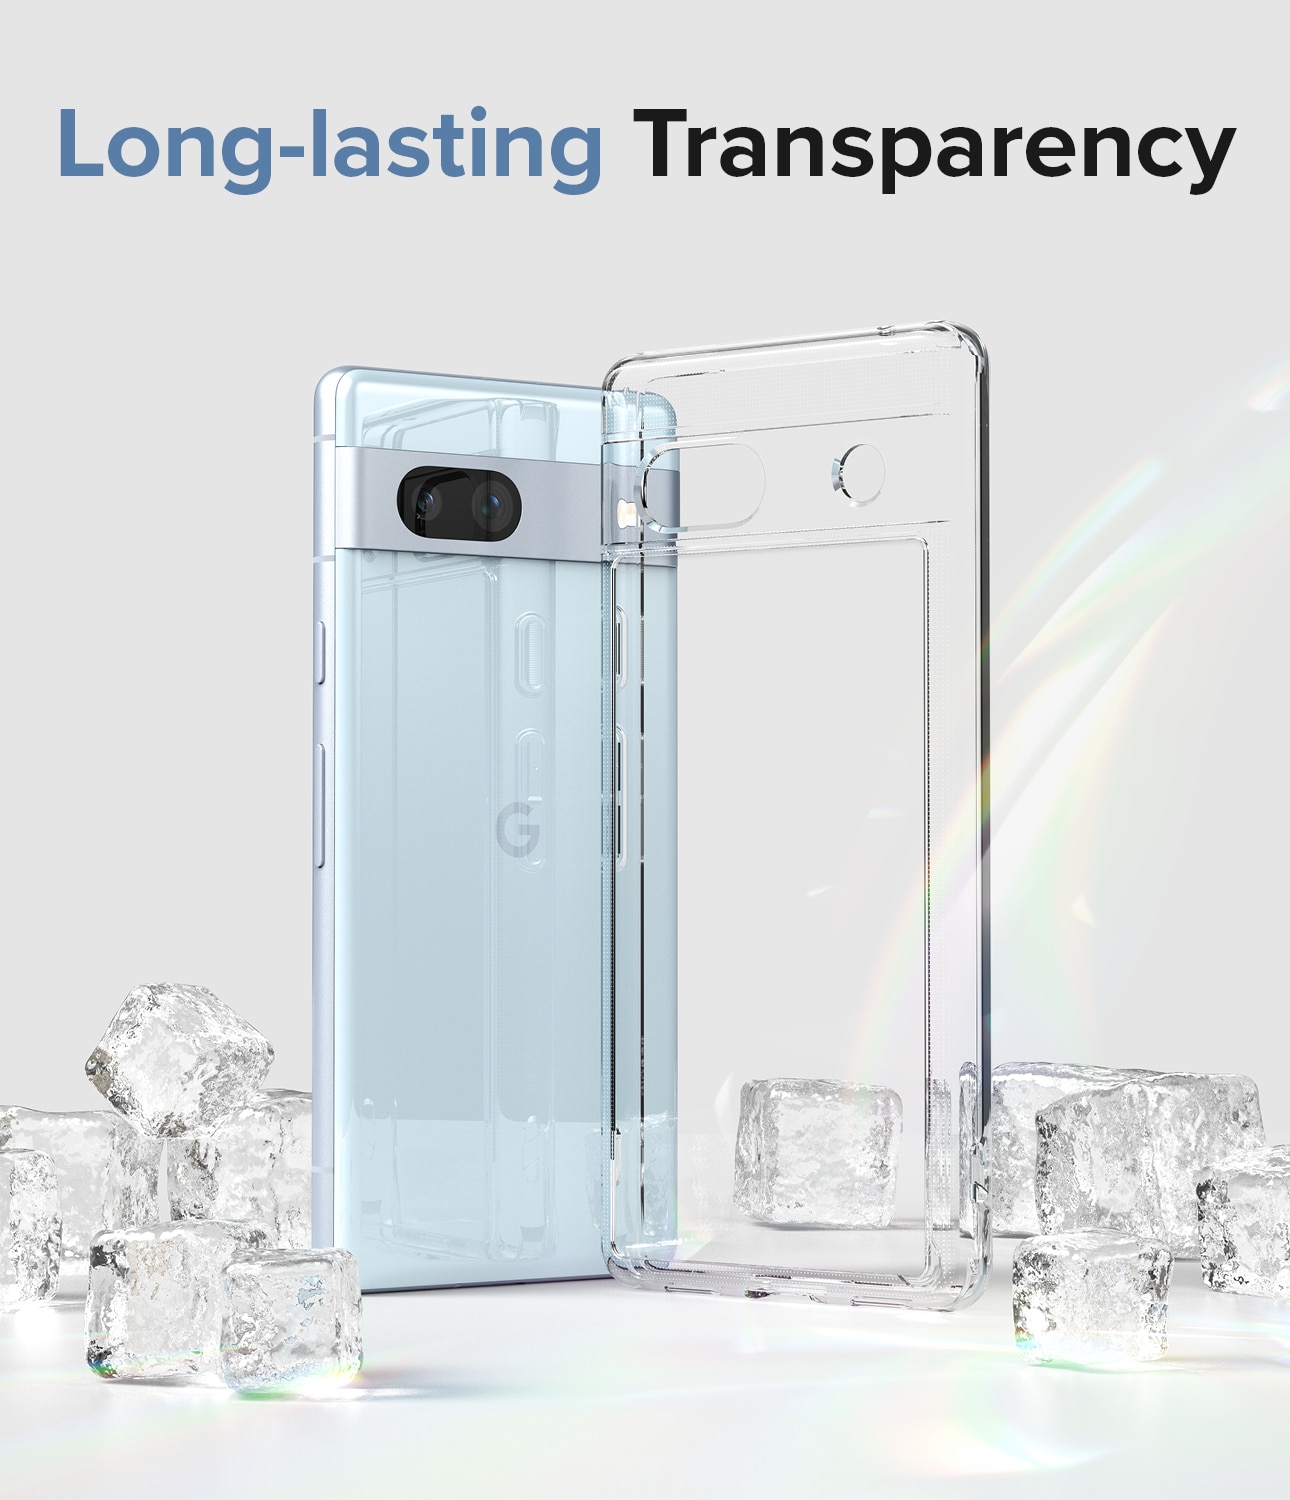 Cover Fusion Google Pixel 7a Clear